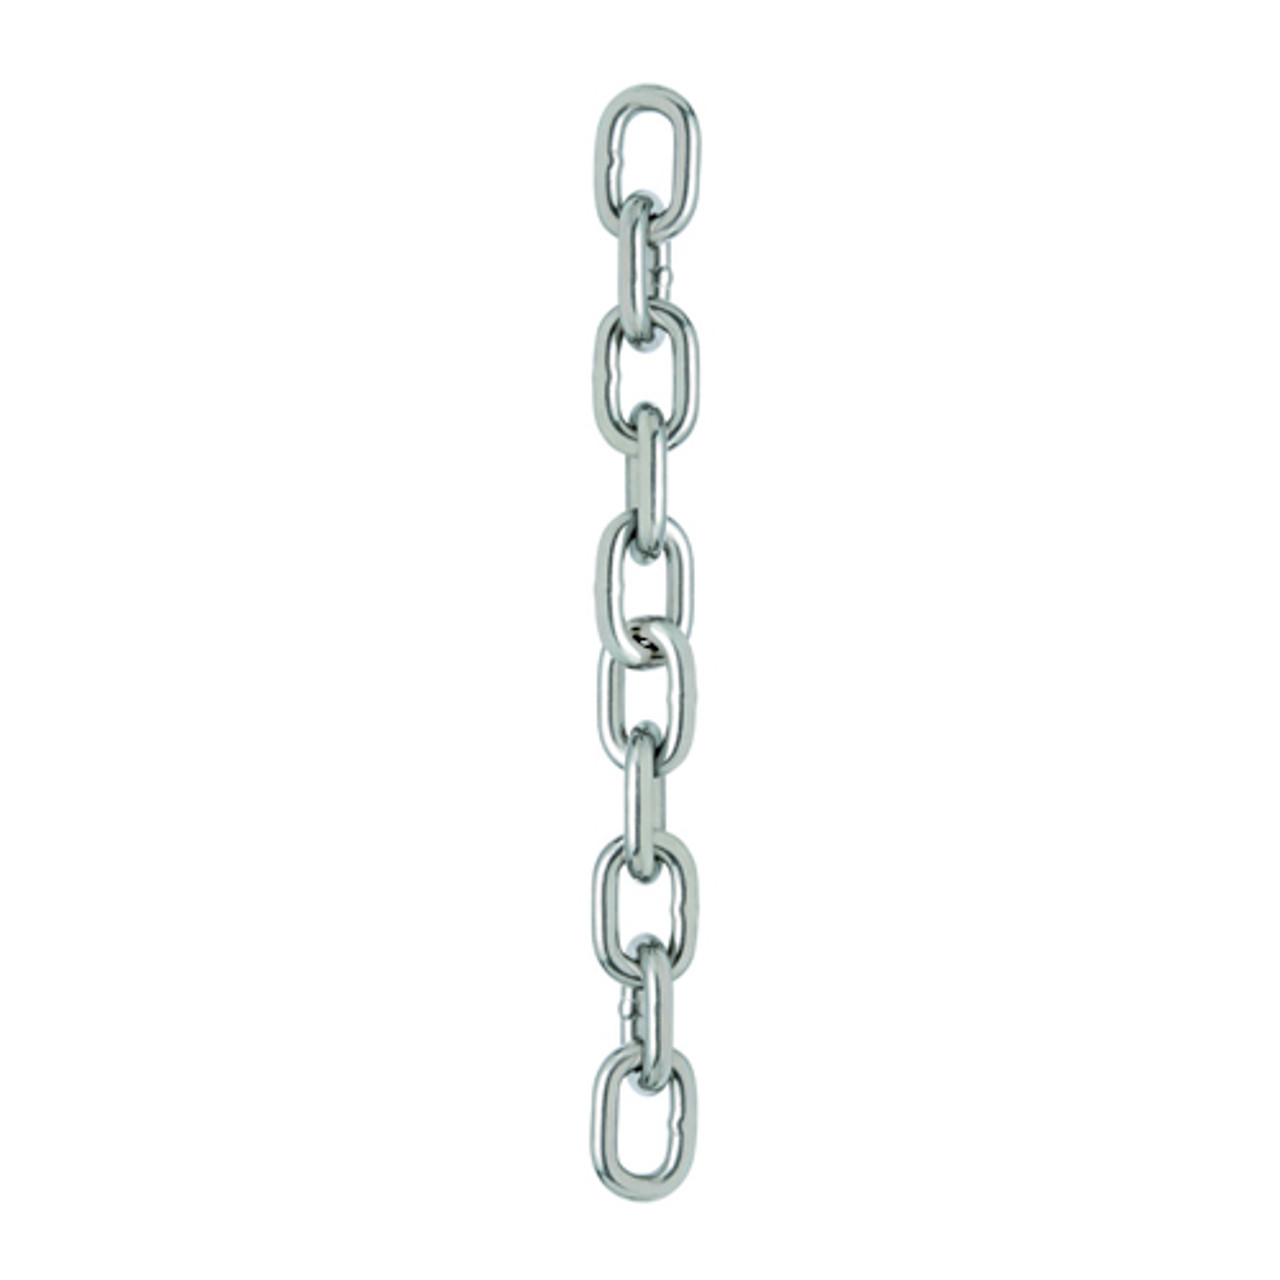 Stainless Chain Type 316, 3/8, Imported.